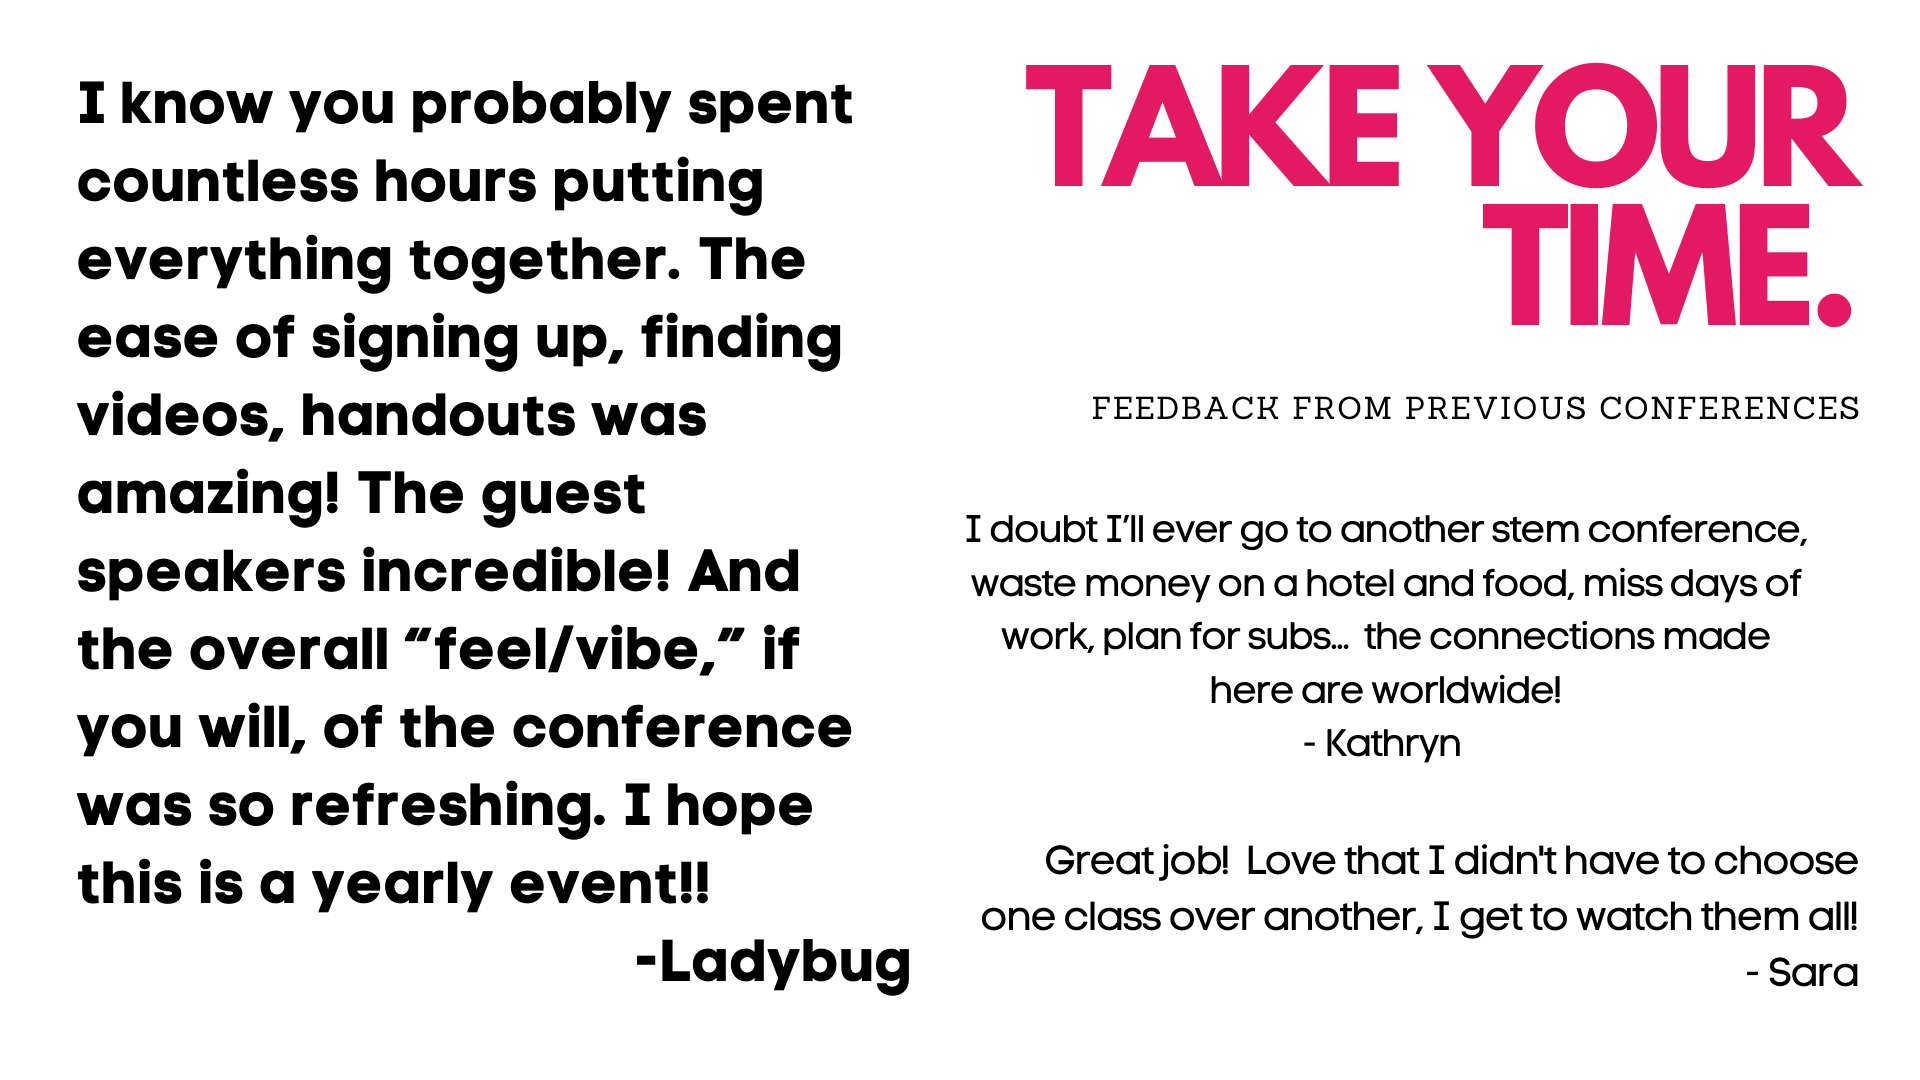 Take your time. "I know you probably spent countless hours putting everything together. The ease of signing up, finding videos, handouts was amazing!" - Ladybug